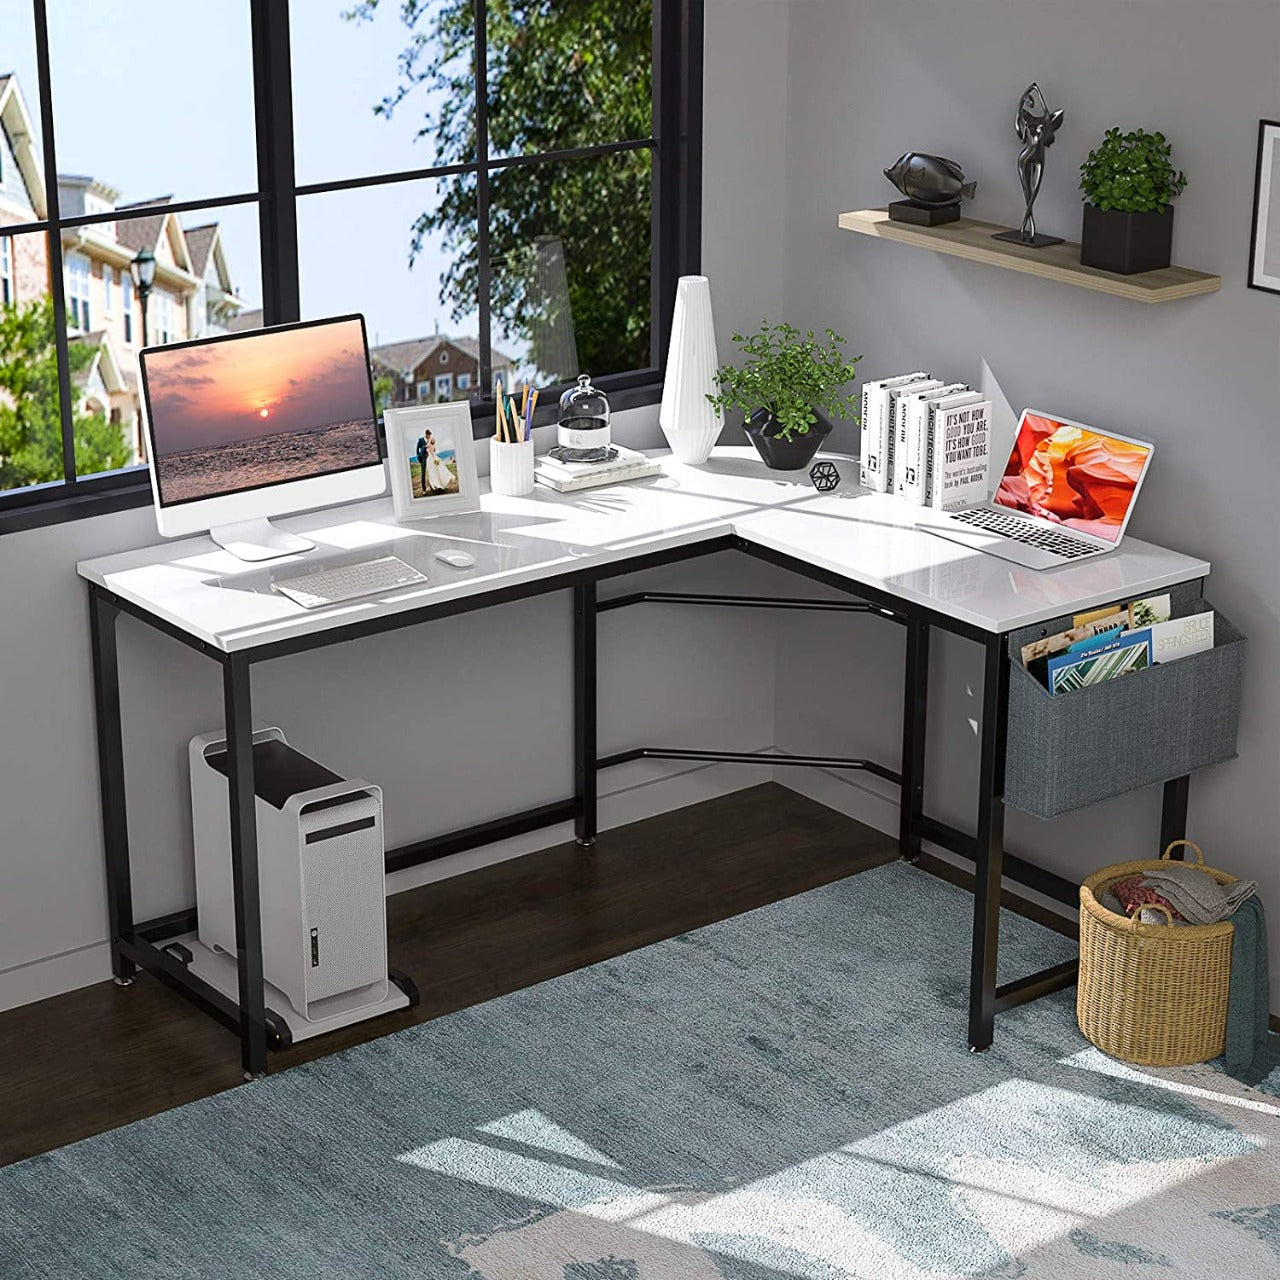 300+ Modern Study Table Designs For Home - Pepperfry